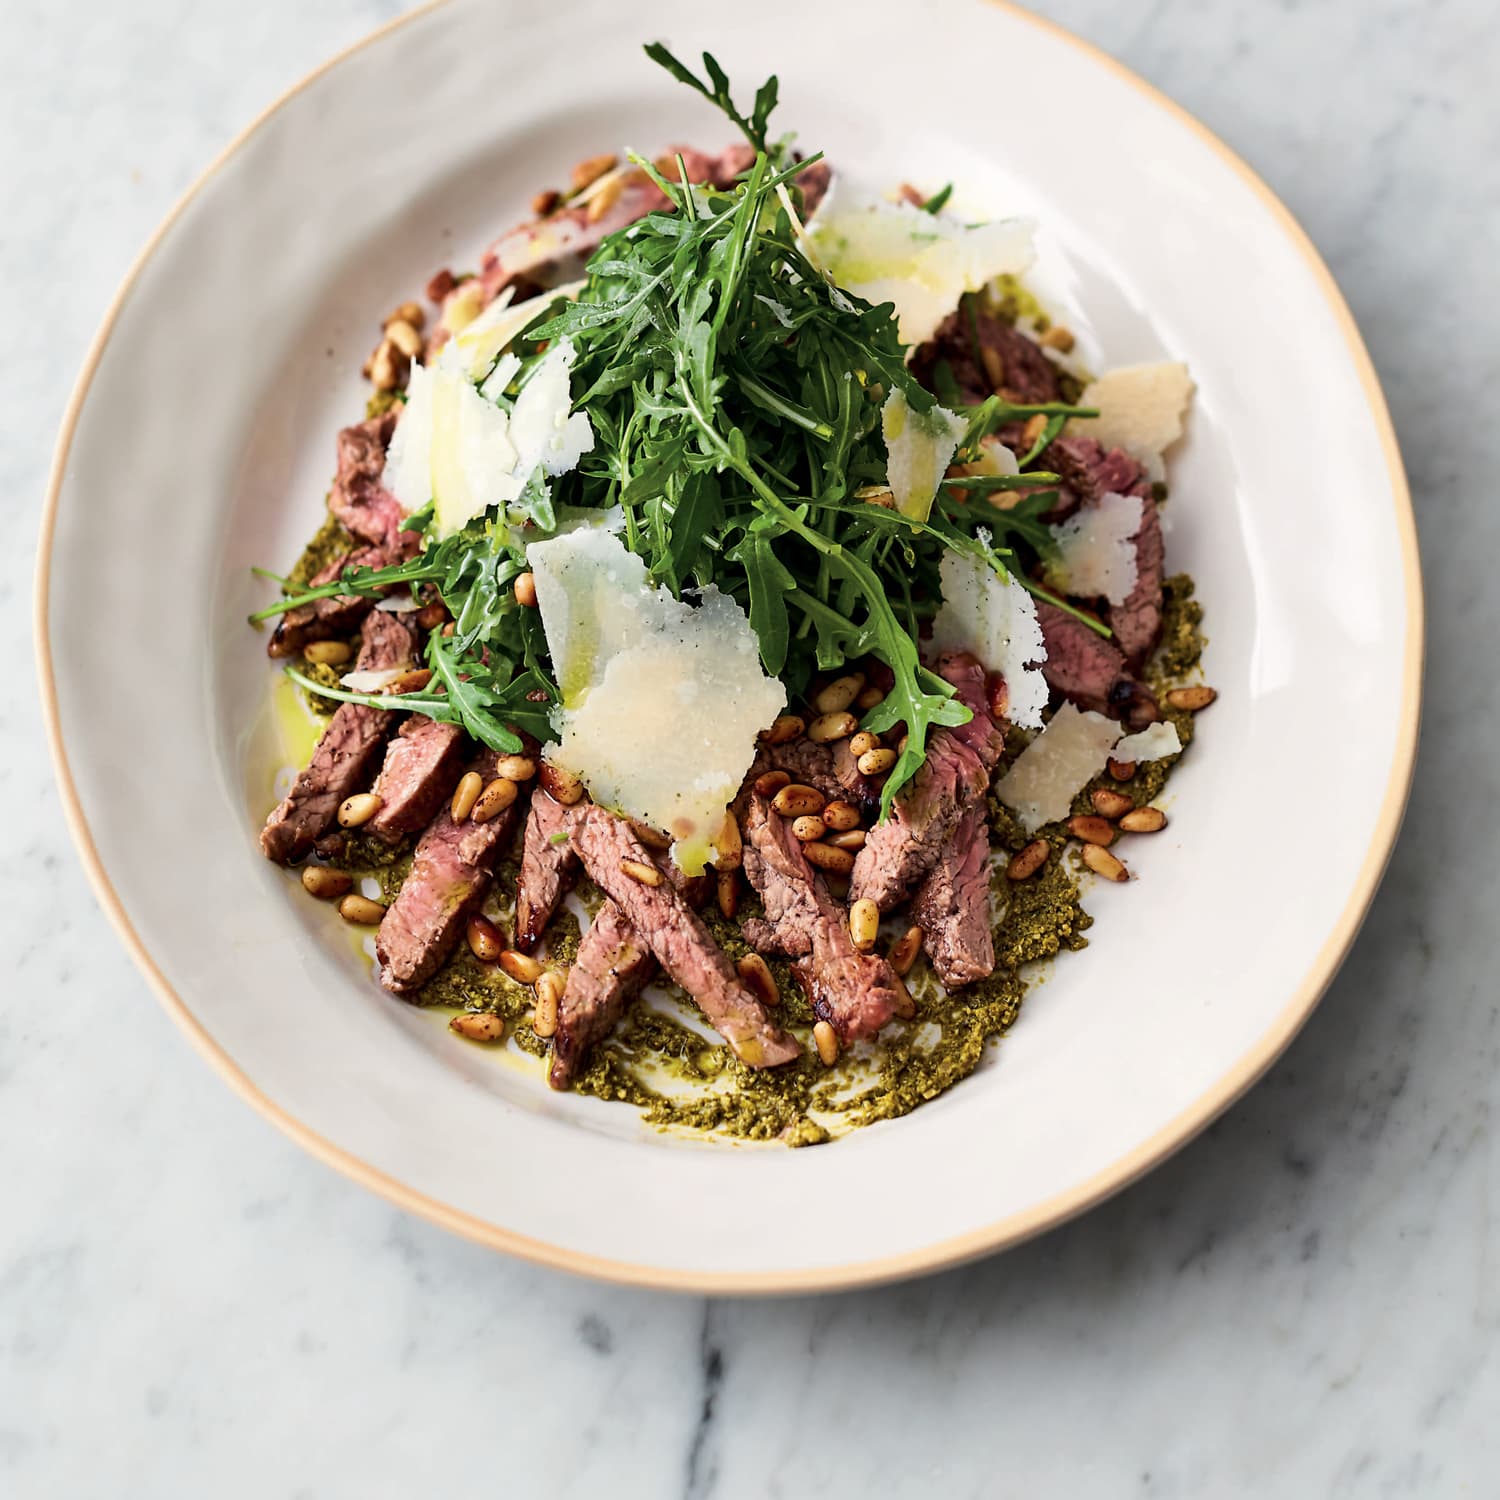 Jamie Oliver's 5-Ingredient Italian Seared Beef | The Kitchn